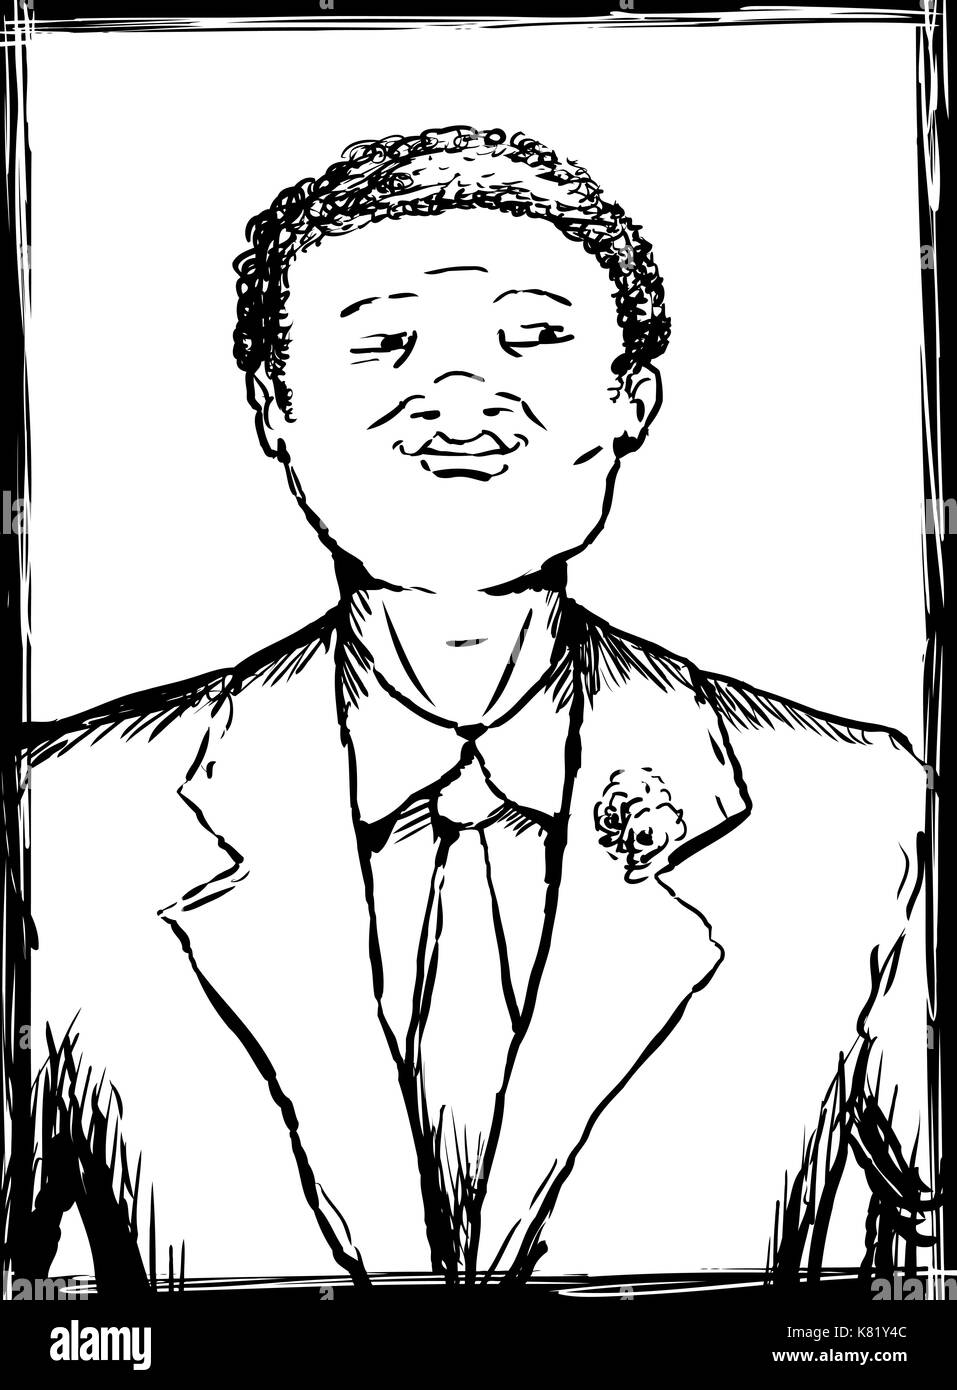 Outline illustration portrait of smiling young African American man in business suit and necktie Stock Photo